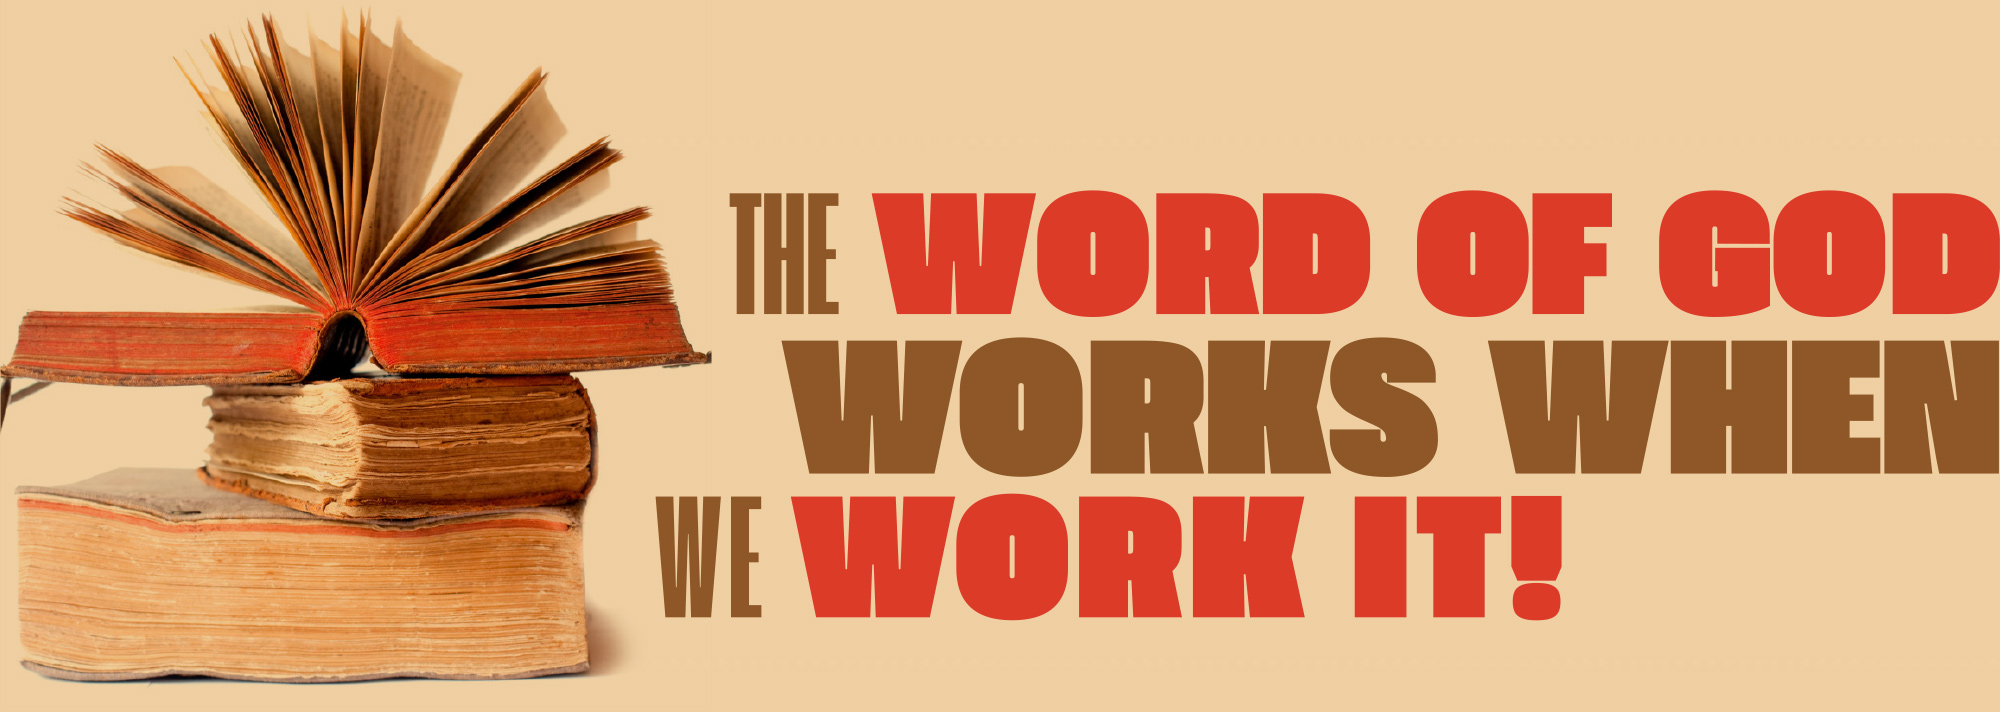 The Word of God Works When We Work It!